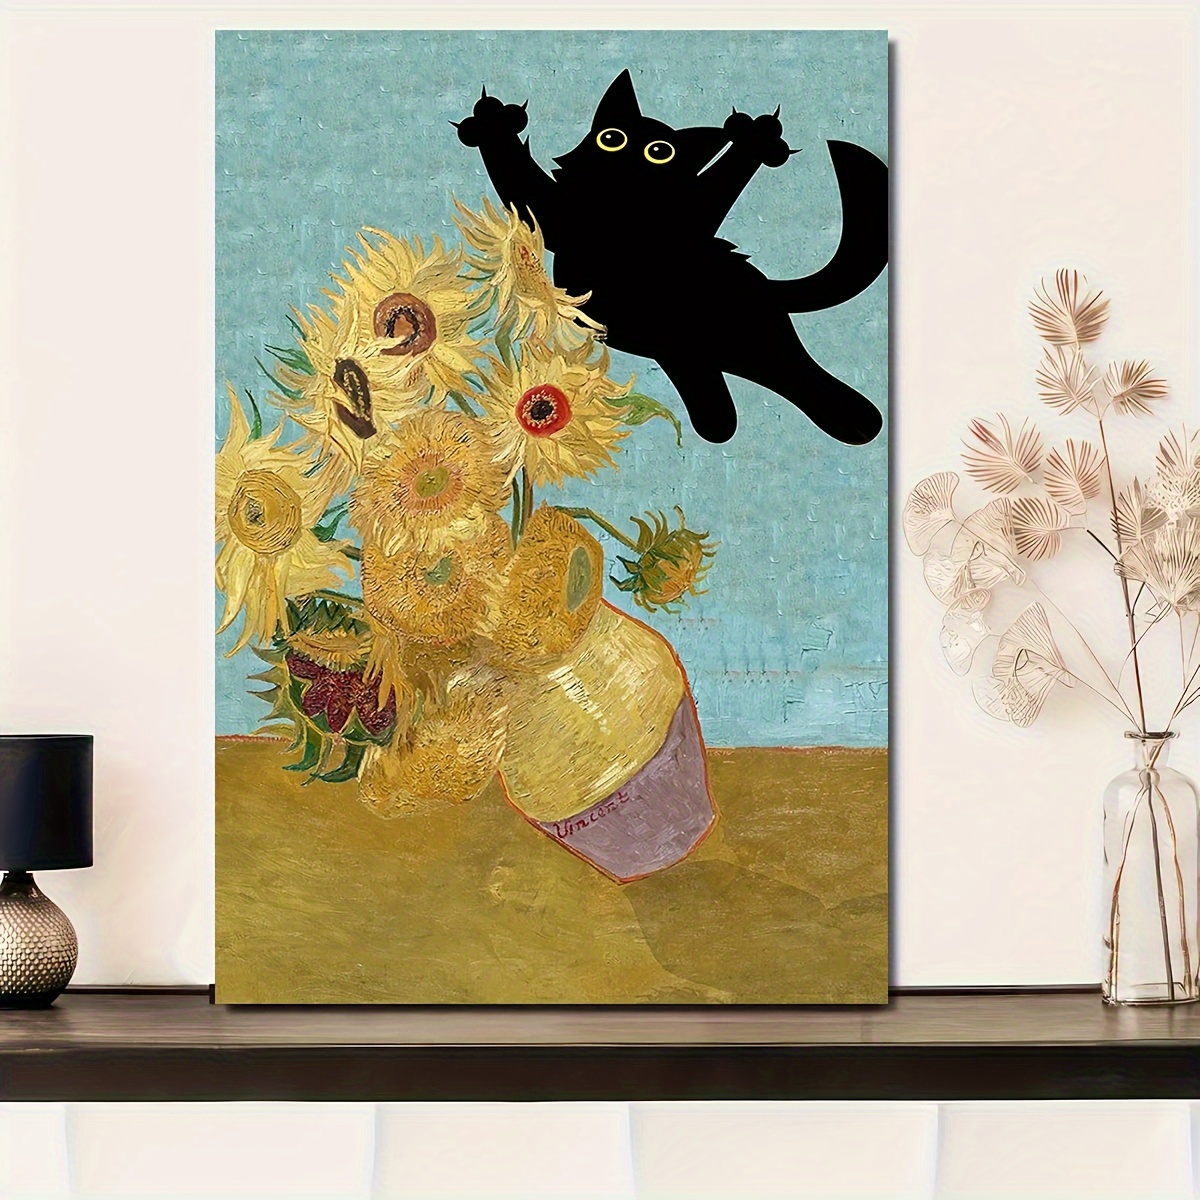 

Charming Cat & Sunflower Canvas Art Poster, 12x16" - Frameless Wall Decor For Home, Office, Cafe | Perfect For Bedroom, Living Room, Kitchen, Bathroom